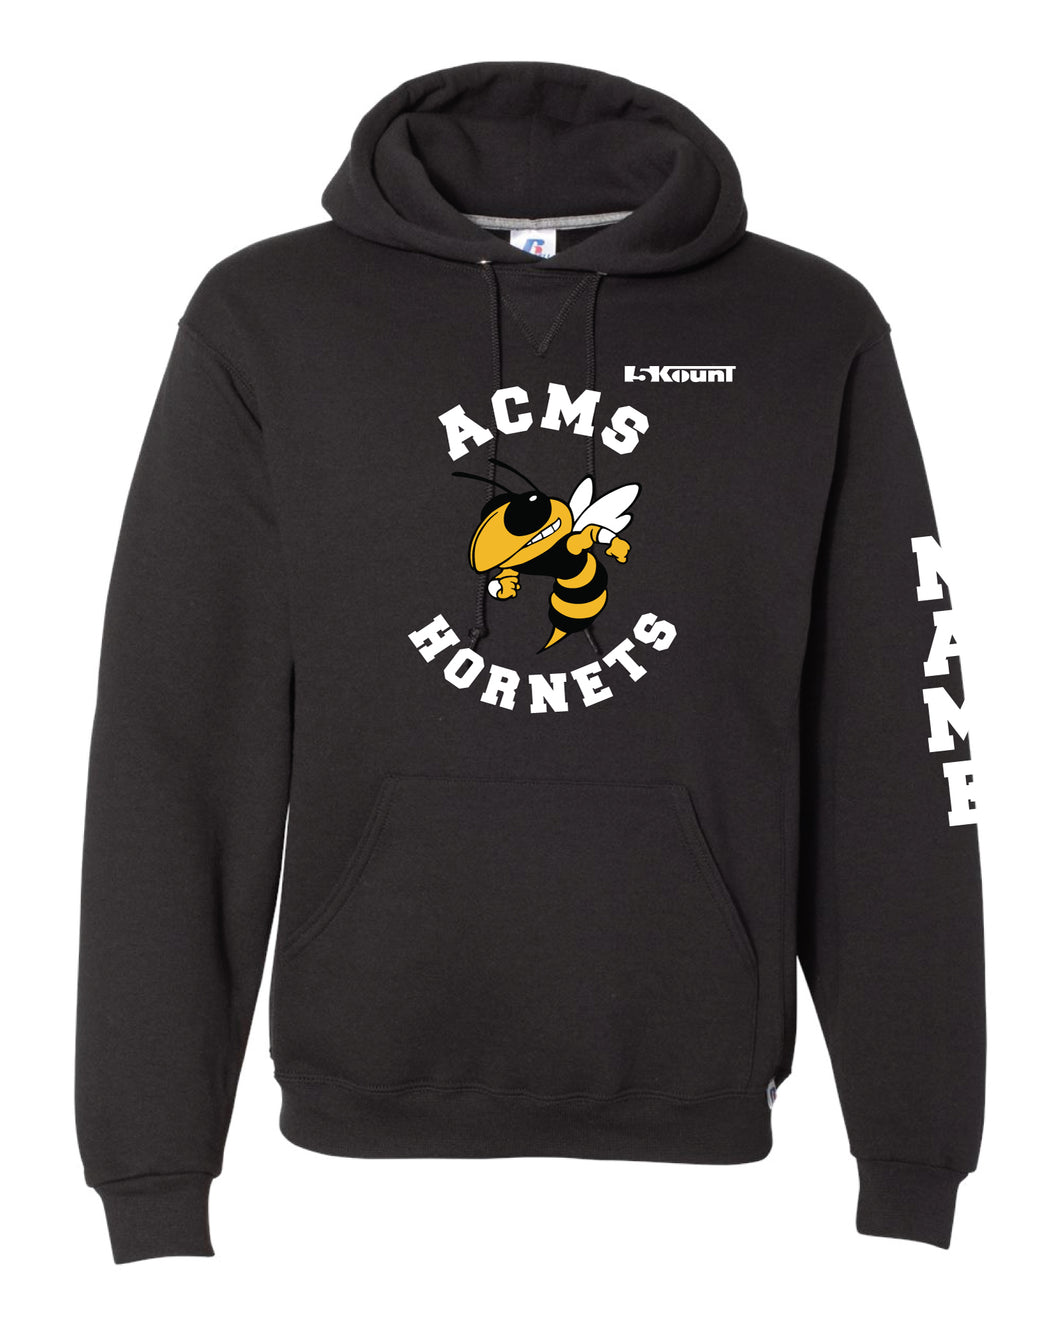 Anne Chesnutt Hornets Russell Athletic Cotton Hoodie - Black (Does Not Meet School Uniform Requirements) - 5KounT2018